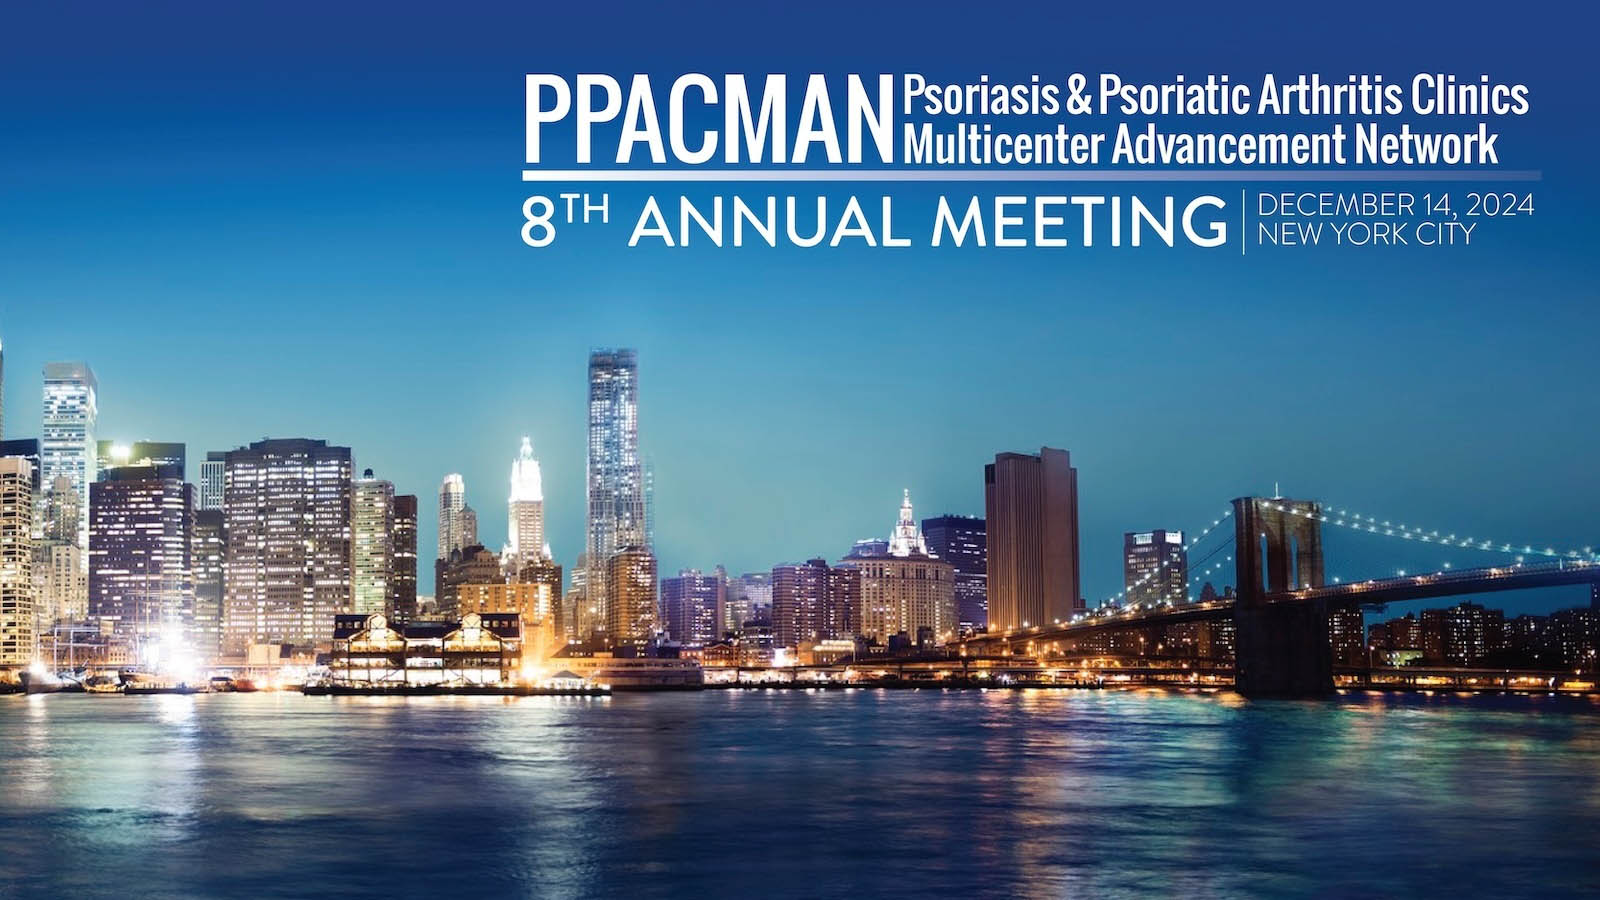 Save the date for the 8th annual meeting. December 14, 2024. New York City.